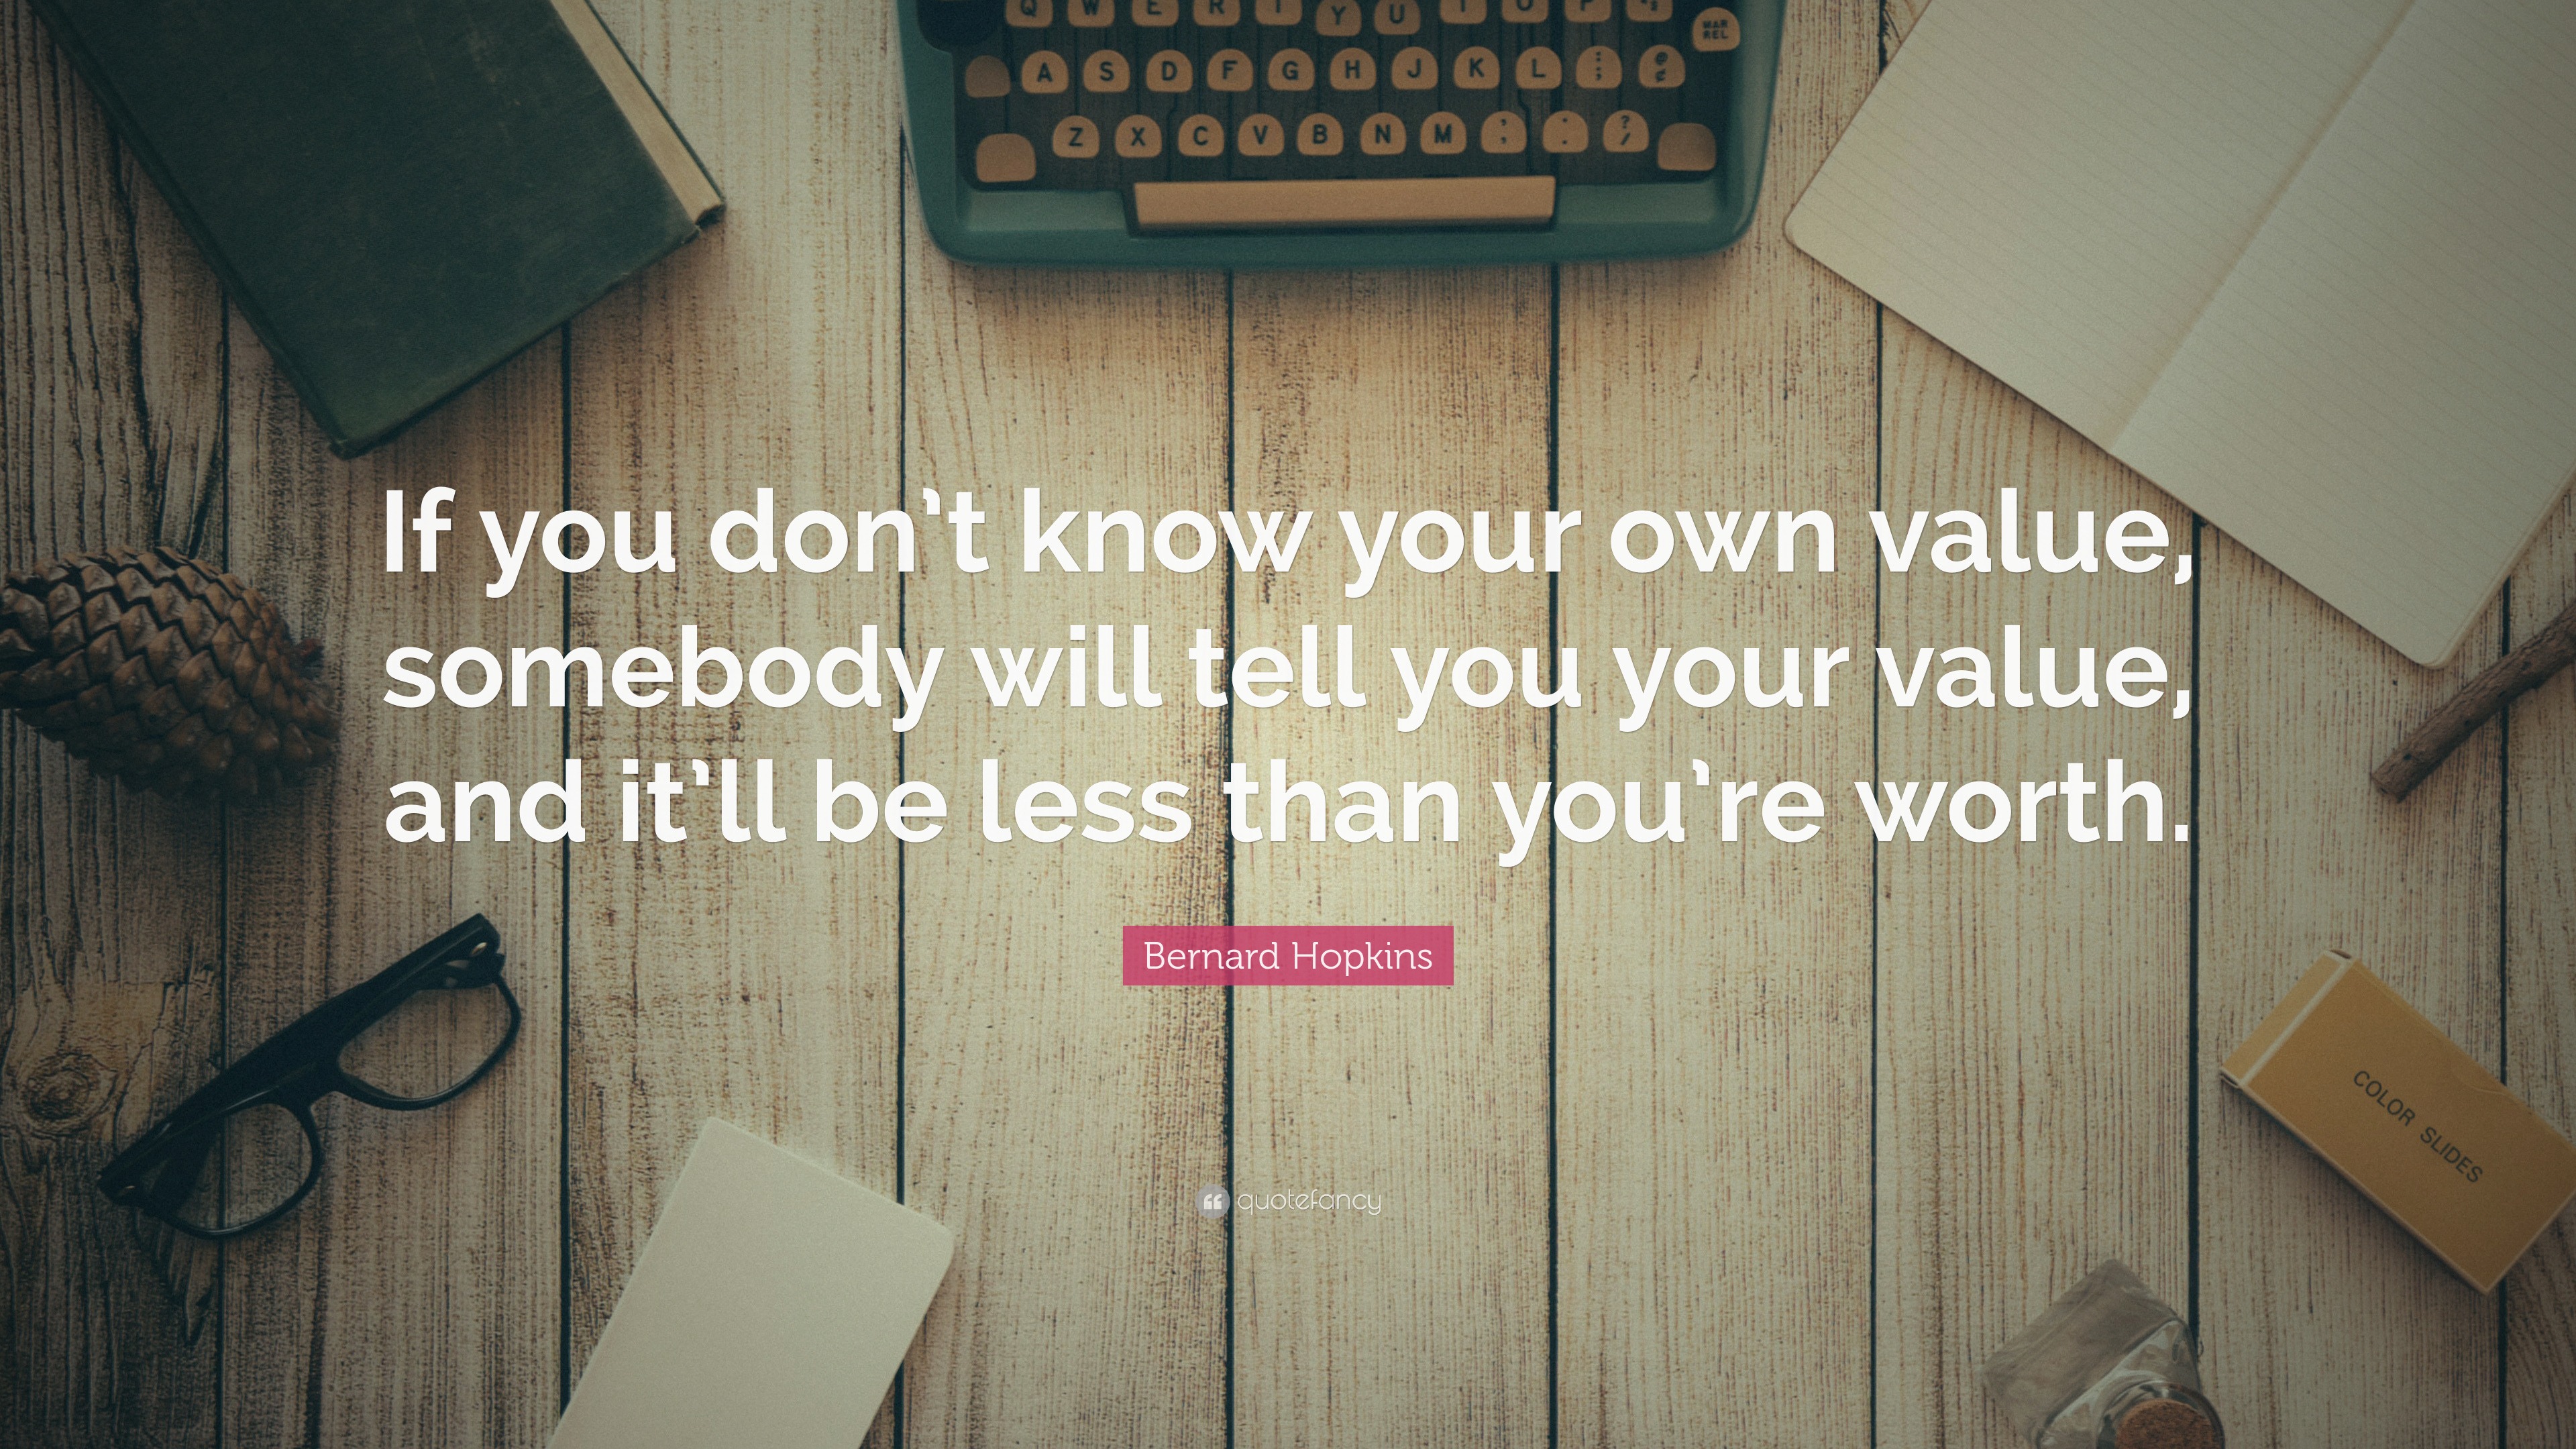 Bernard Hopkins Quote: “If you don’t know your own value, somebody will